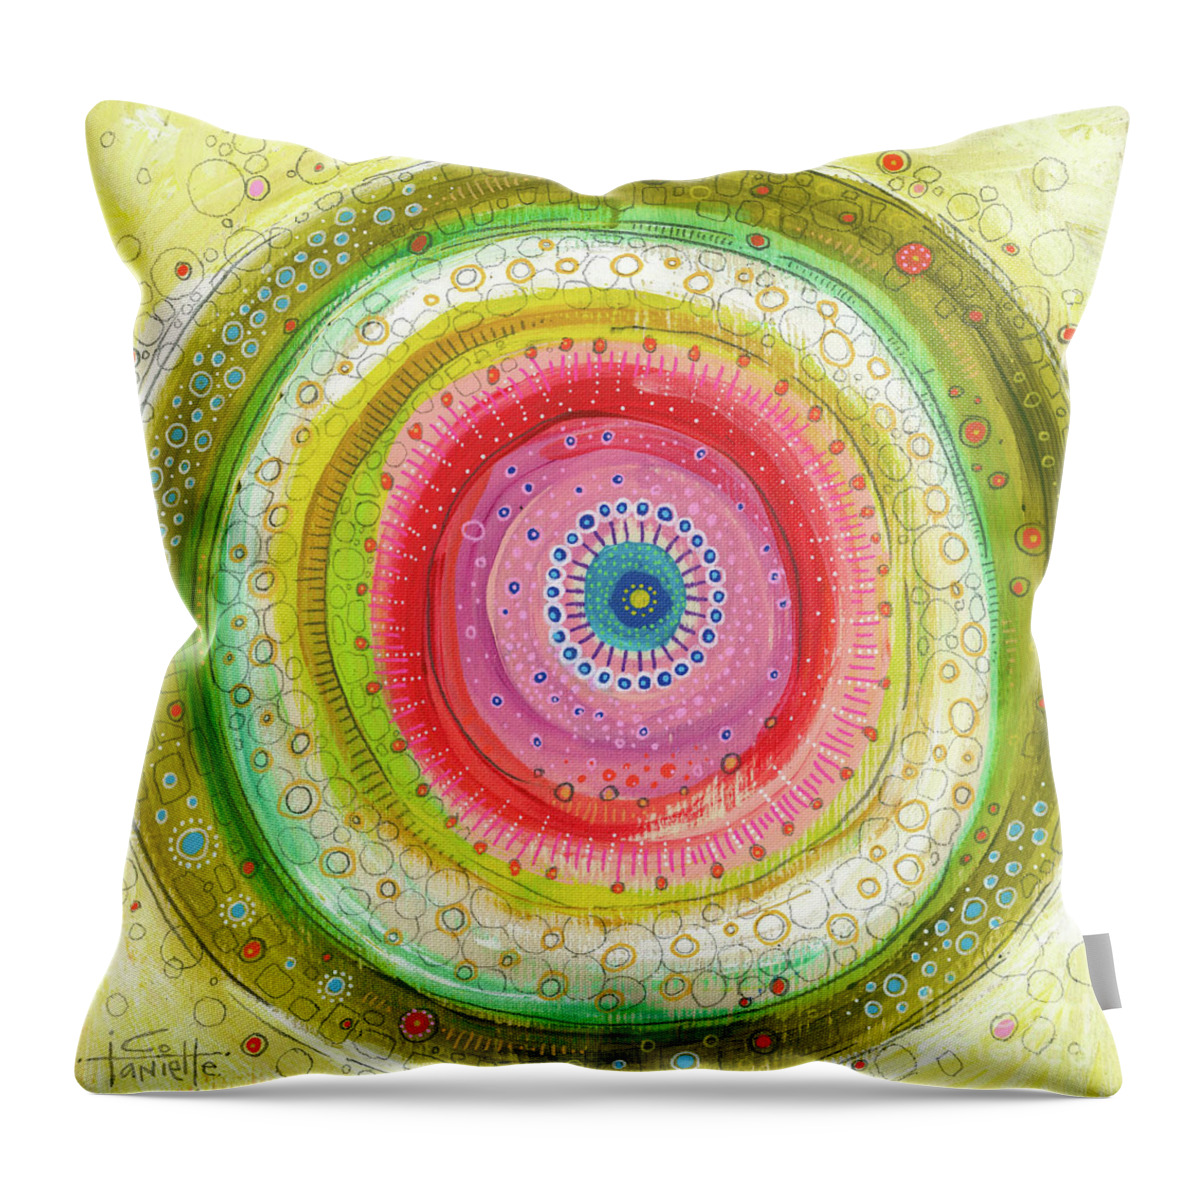 Empowered Throw Pillow featuring the painting I Am Empowered by Tanielle Childers